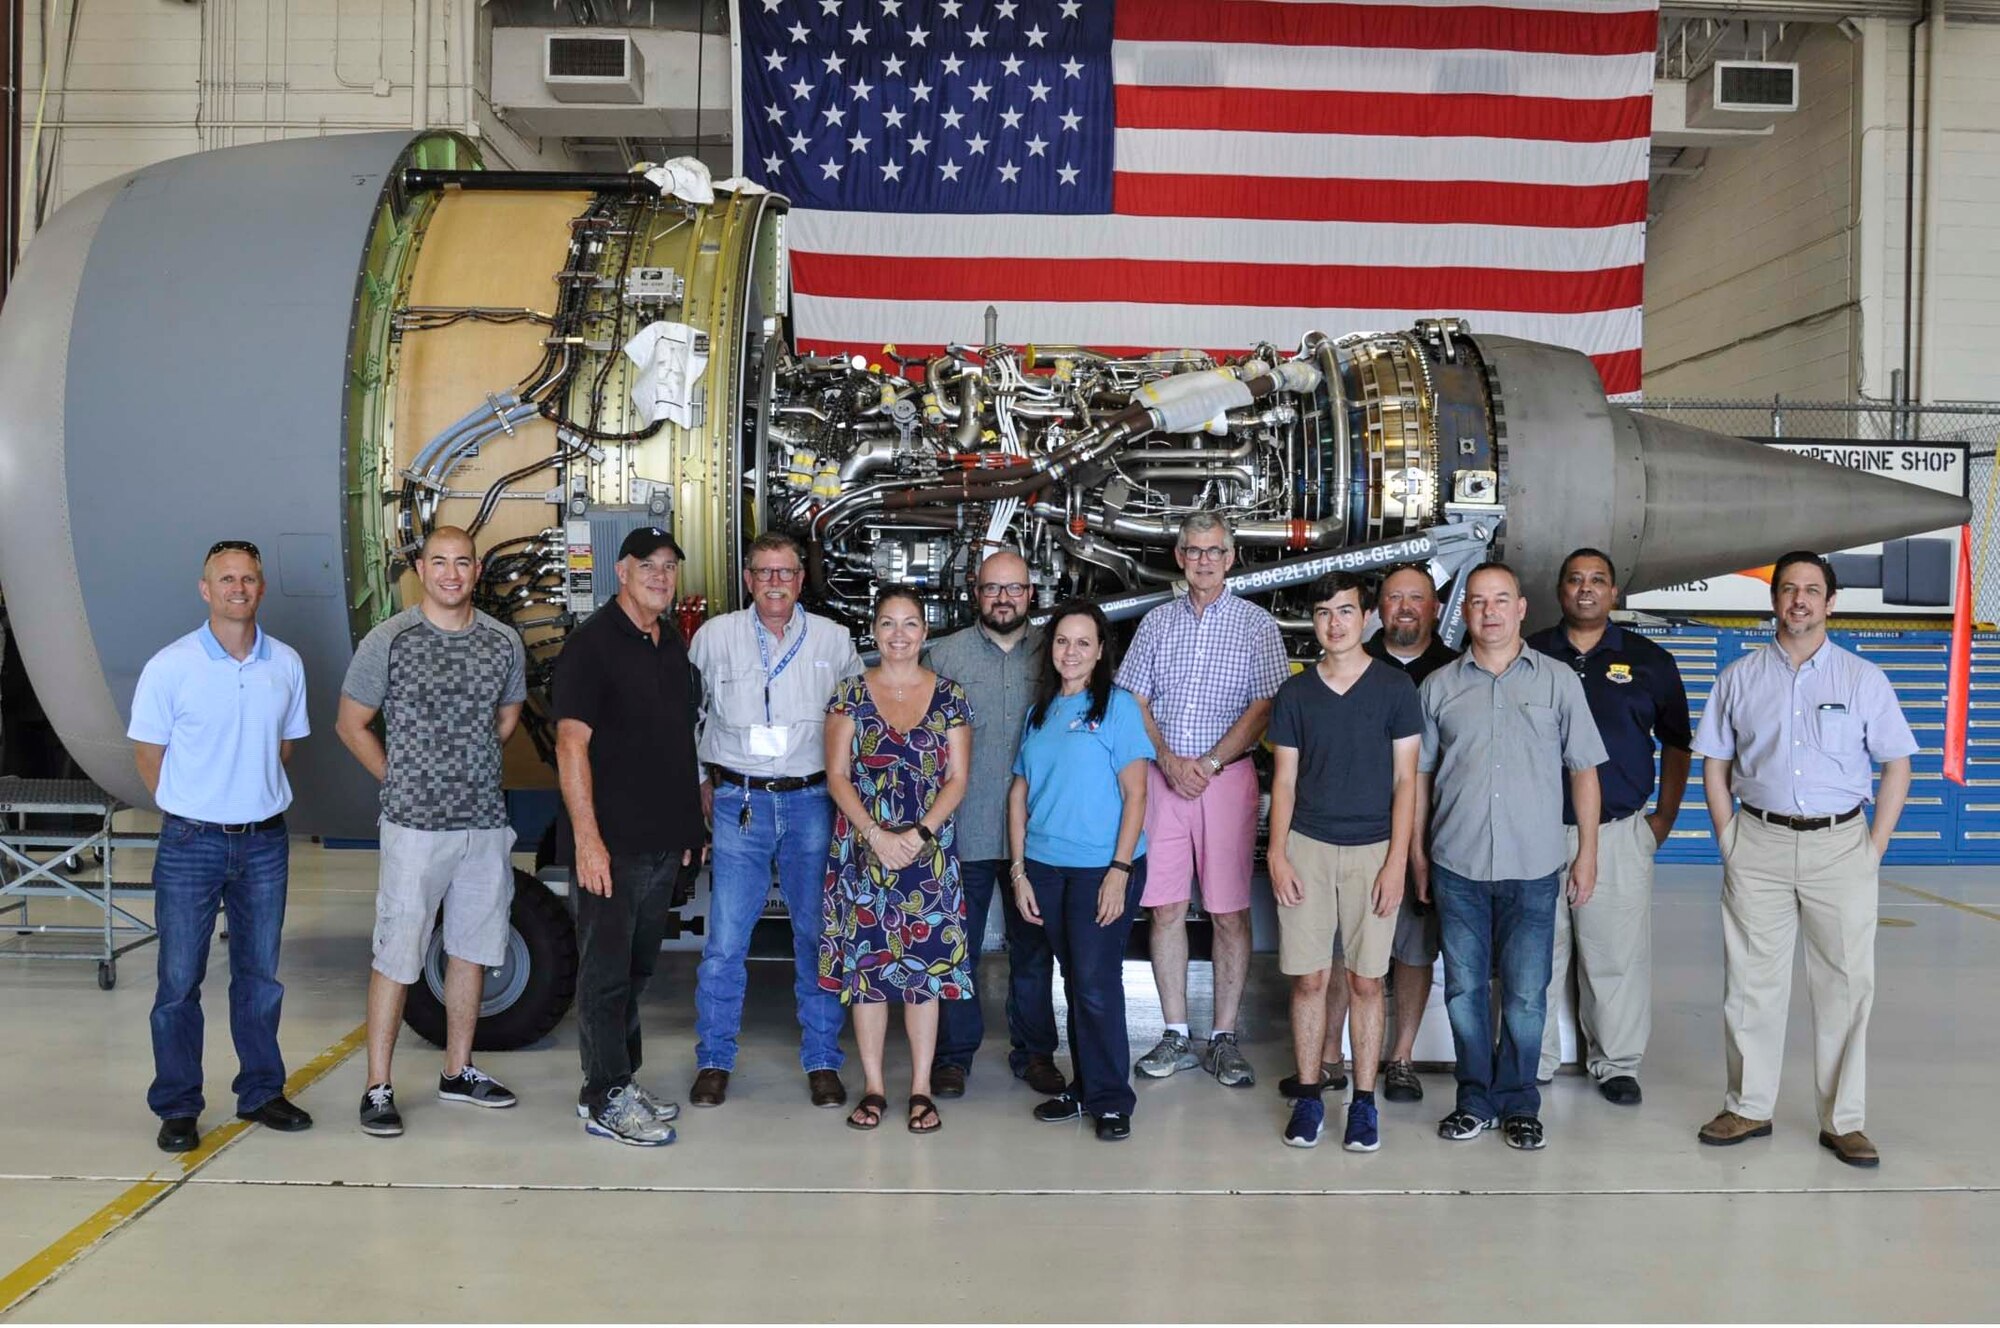 Honorary commanders of the 433rd Airlift Wing and their guests witnessed firsthand the differences between the engines of the C-5A and C-5M Galaxy models during the annual honorary commanders tour of the 433rd Maintenance Group Sept. 17, 2016 at Joint Base San Antonio-Lackland.  The honorary commanders program was developed to encourage an exchange of ideas, share experiences and foster friendships between key members of the local civilian community and the Joint Base San Antonio military community.  The program provides a unique opportunity for San Antonio area community leaders to shadow the 433rd AW, group and squadron commanders. (U.S. Air Force photo/Senior Airman Bryan Swink)